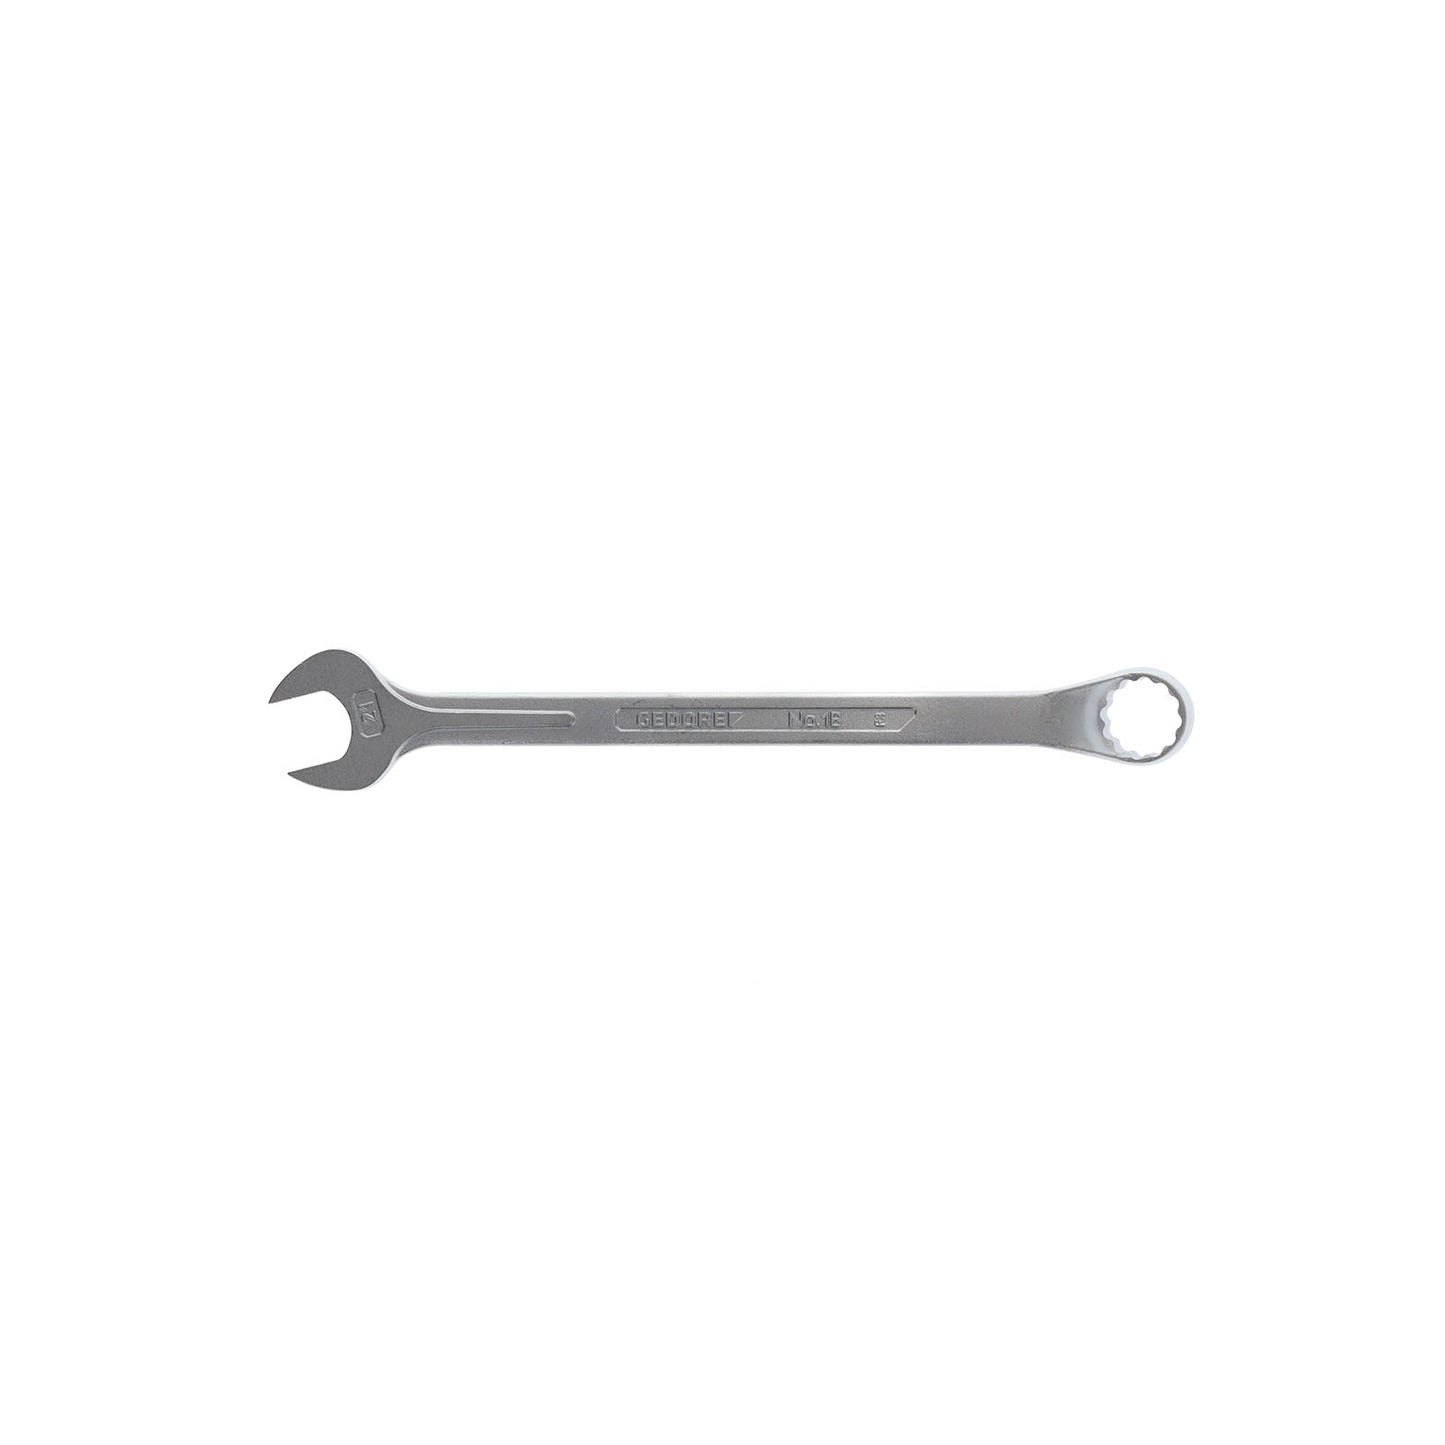 GEDORE 1 B 21 - Offset Combination Wrench, 21mm (6002020)